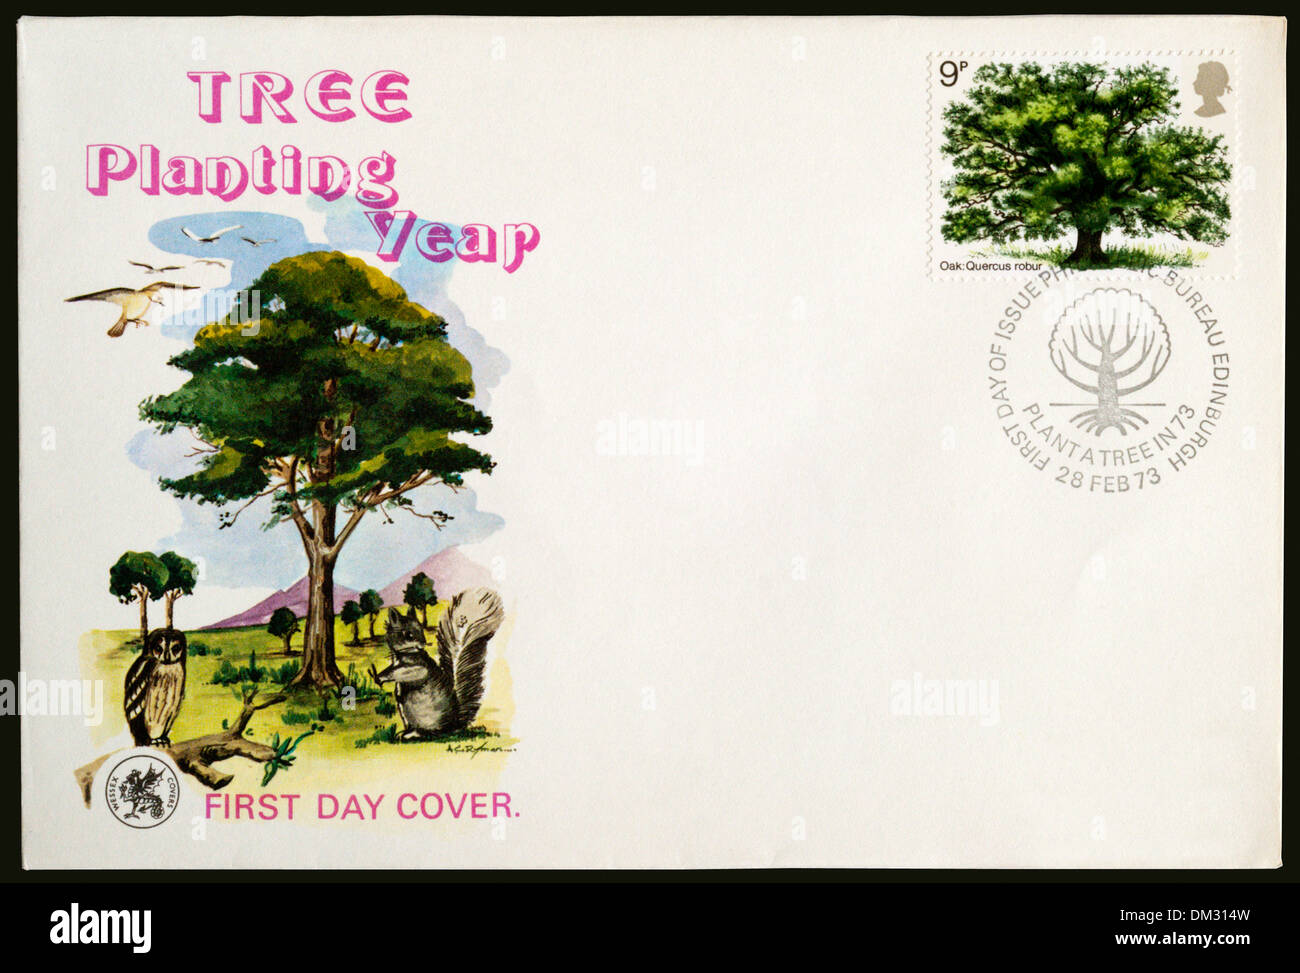 1973 First Day Cover commemorating Tree Planting Year. Postmarked with the slogan 'Plant A Tree in 73'. Stock Photo